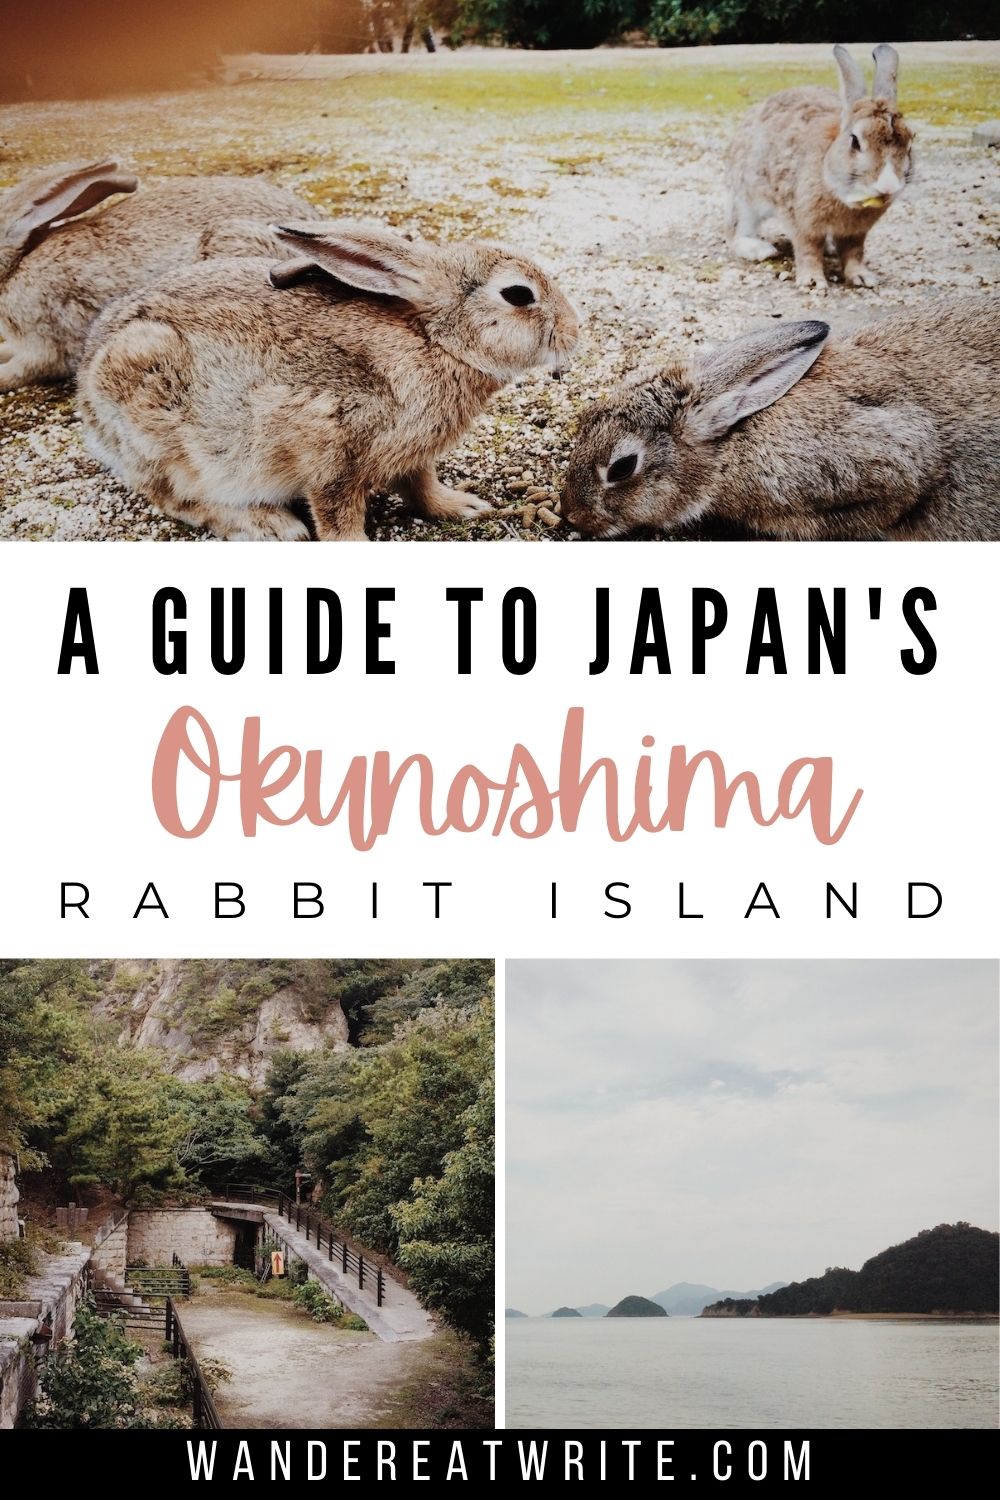 Text: A guide to Japan's Okunoshima Rabbit Island; Pictures: a group of rabbits, abandoned sites from the island, and a beach view